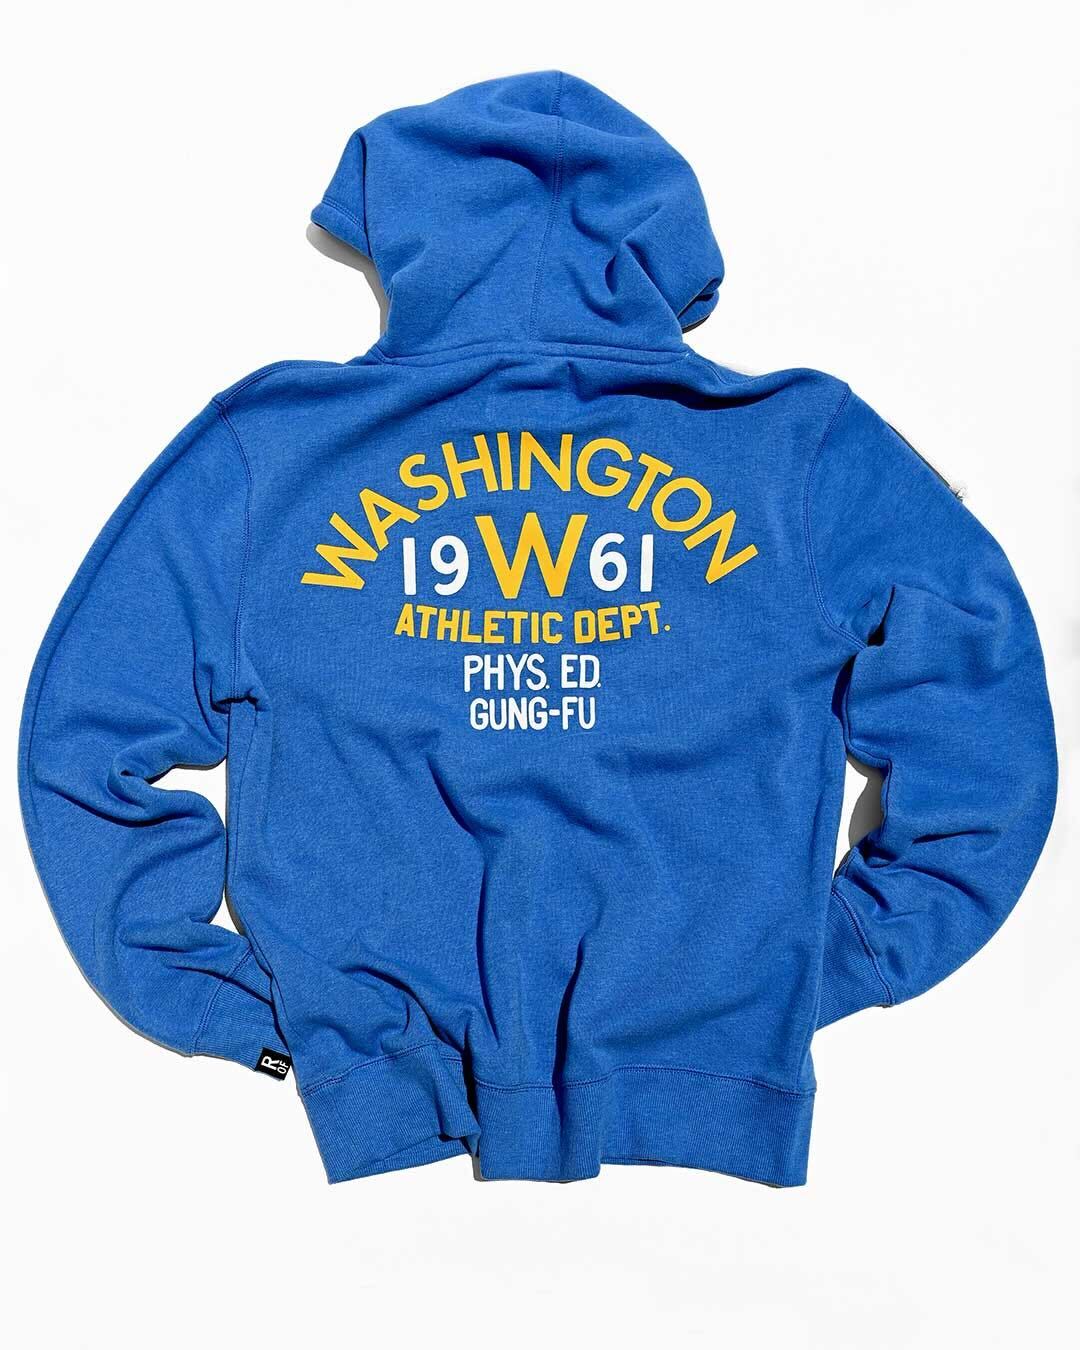 Bruce Lee Seattle &#39;61 Blue PO Hoody - Roots of Fight Canada